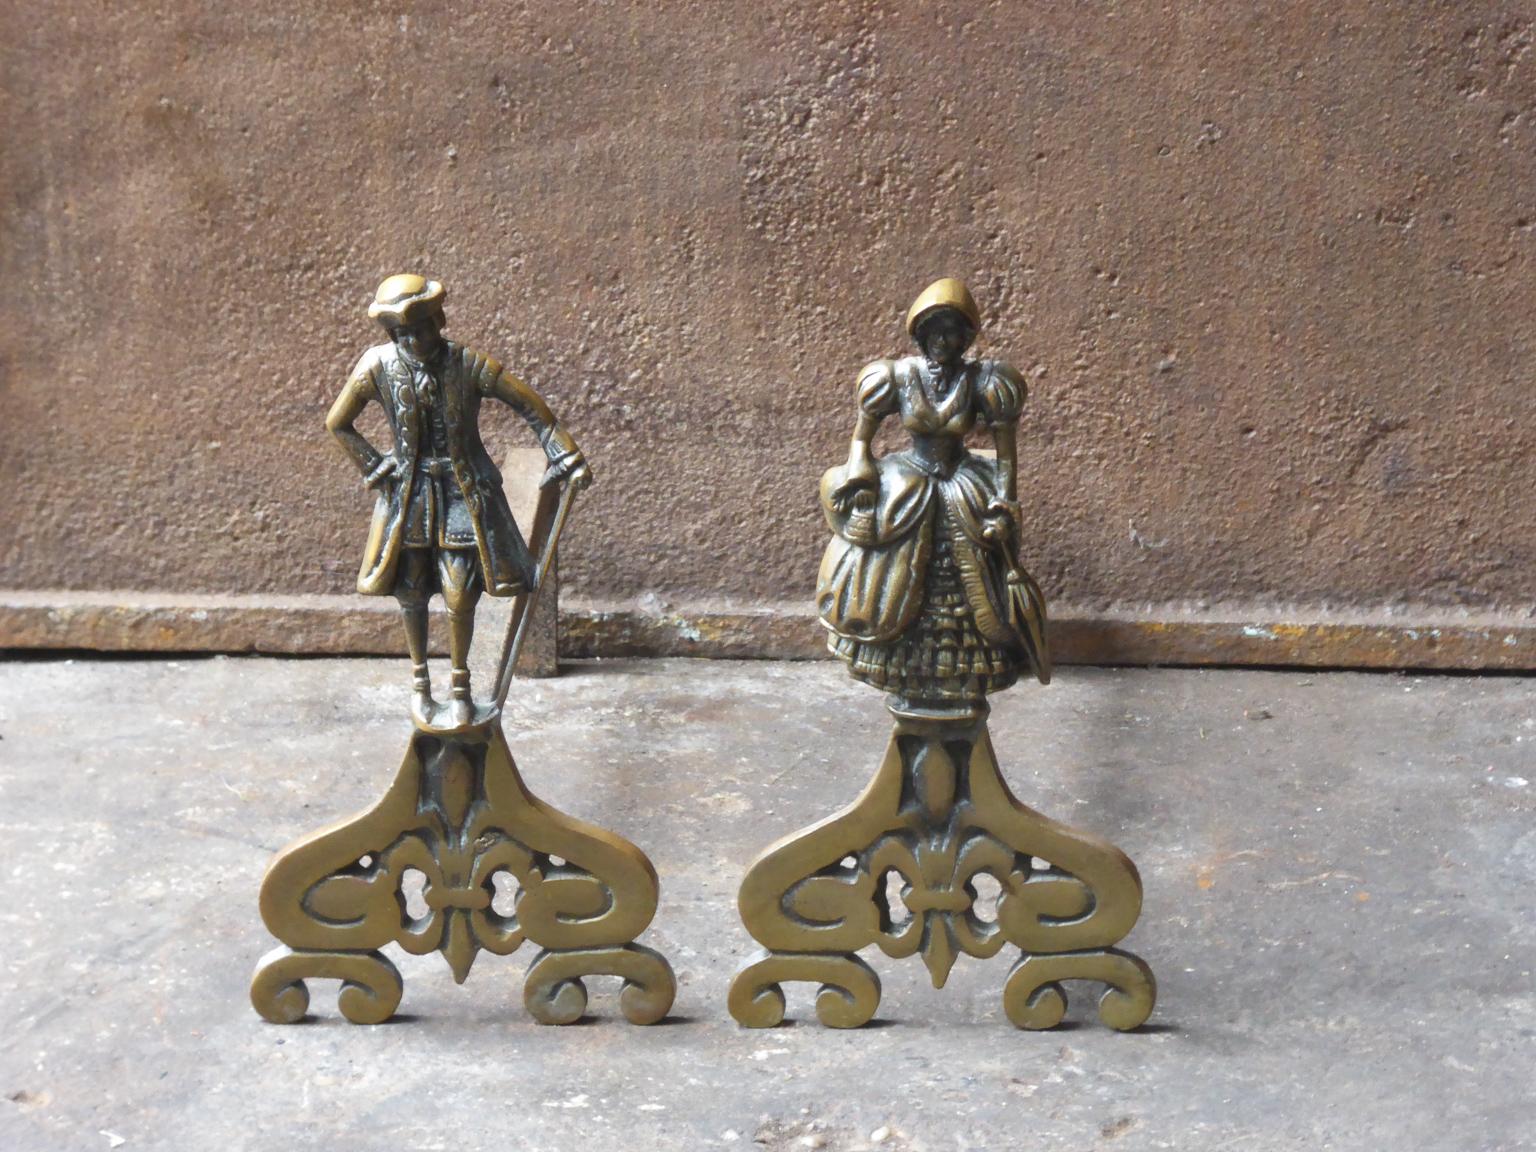 20th century French Napoleon III style andirons made of brass and wrought iron.